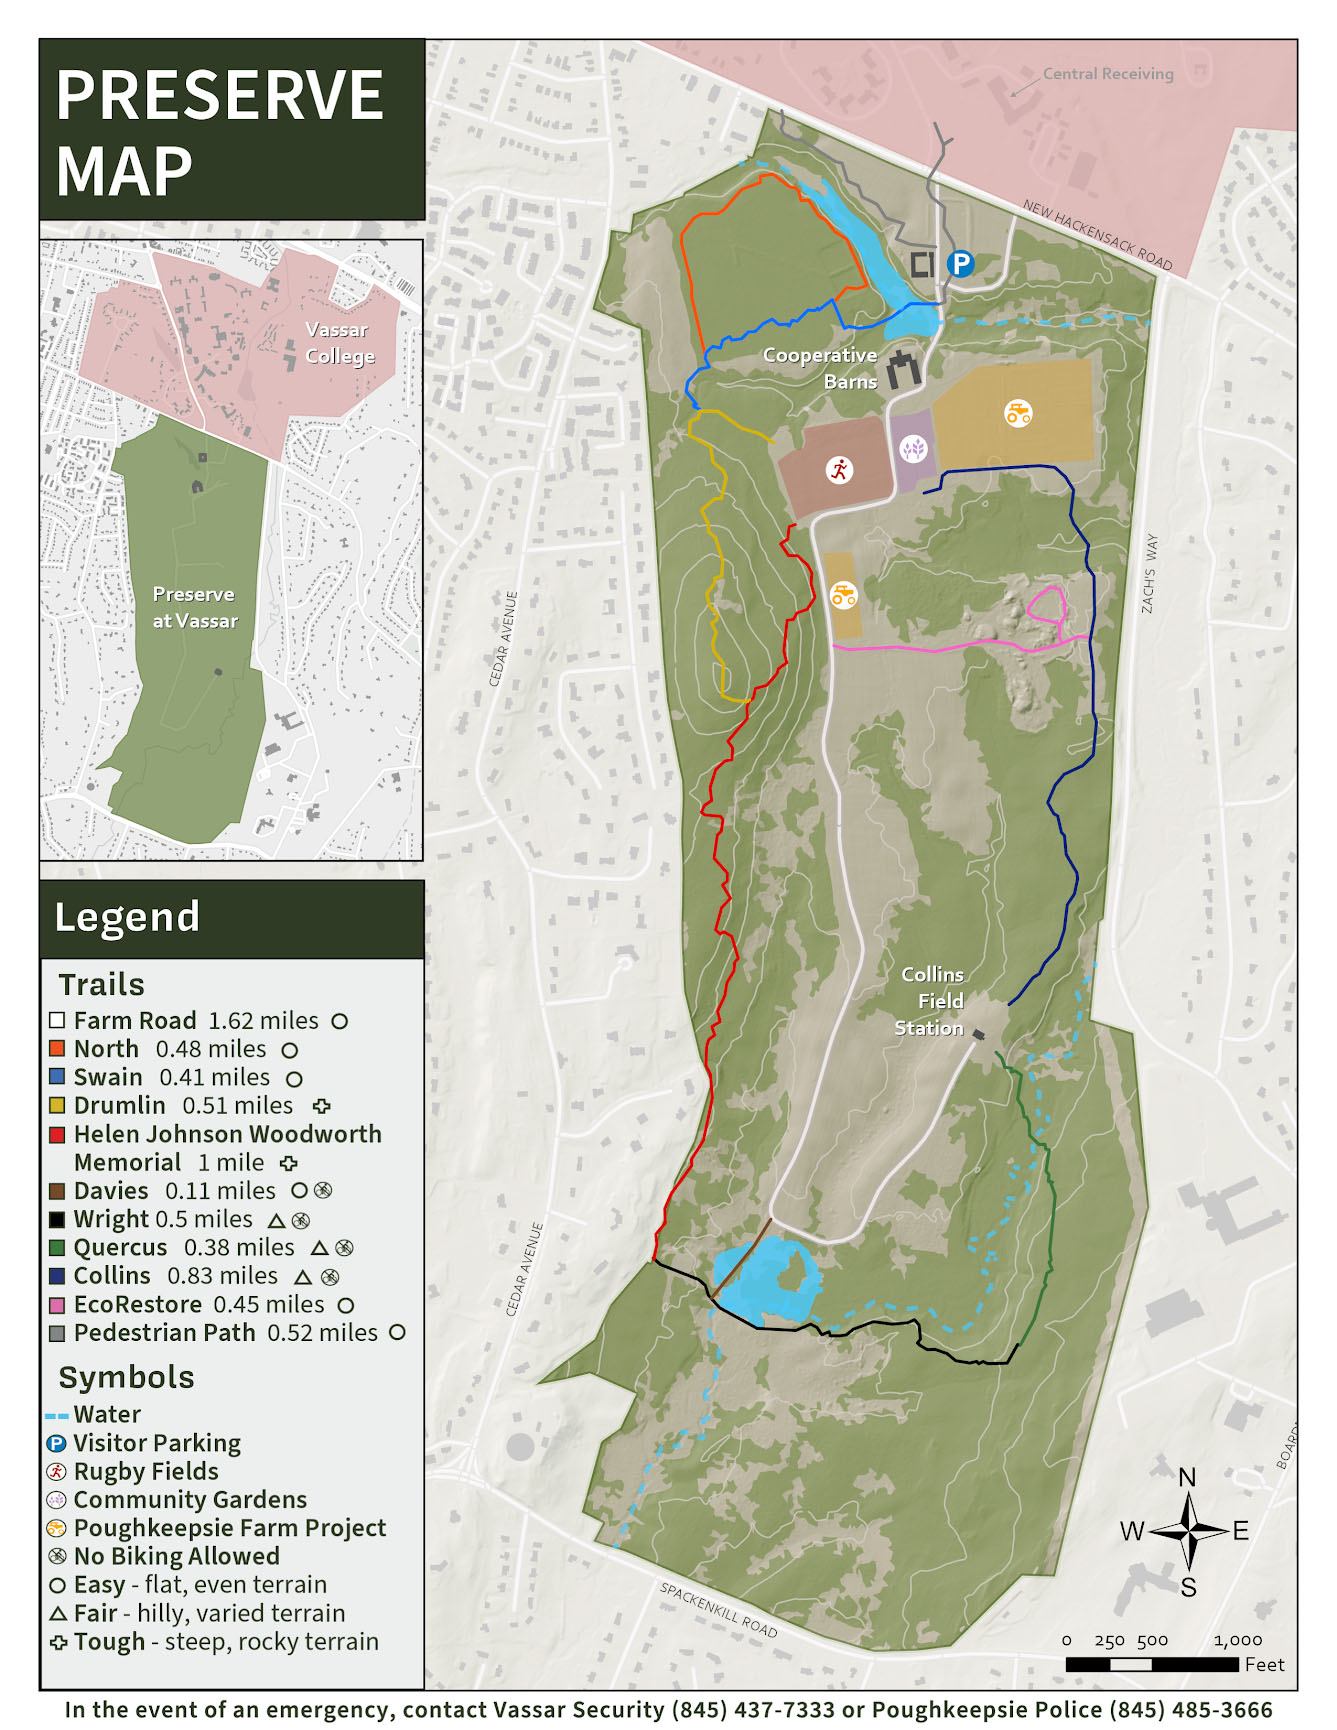 An image depicting a trail map of the Vassar College Preserve.